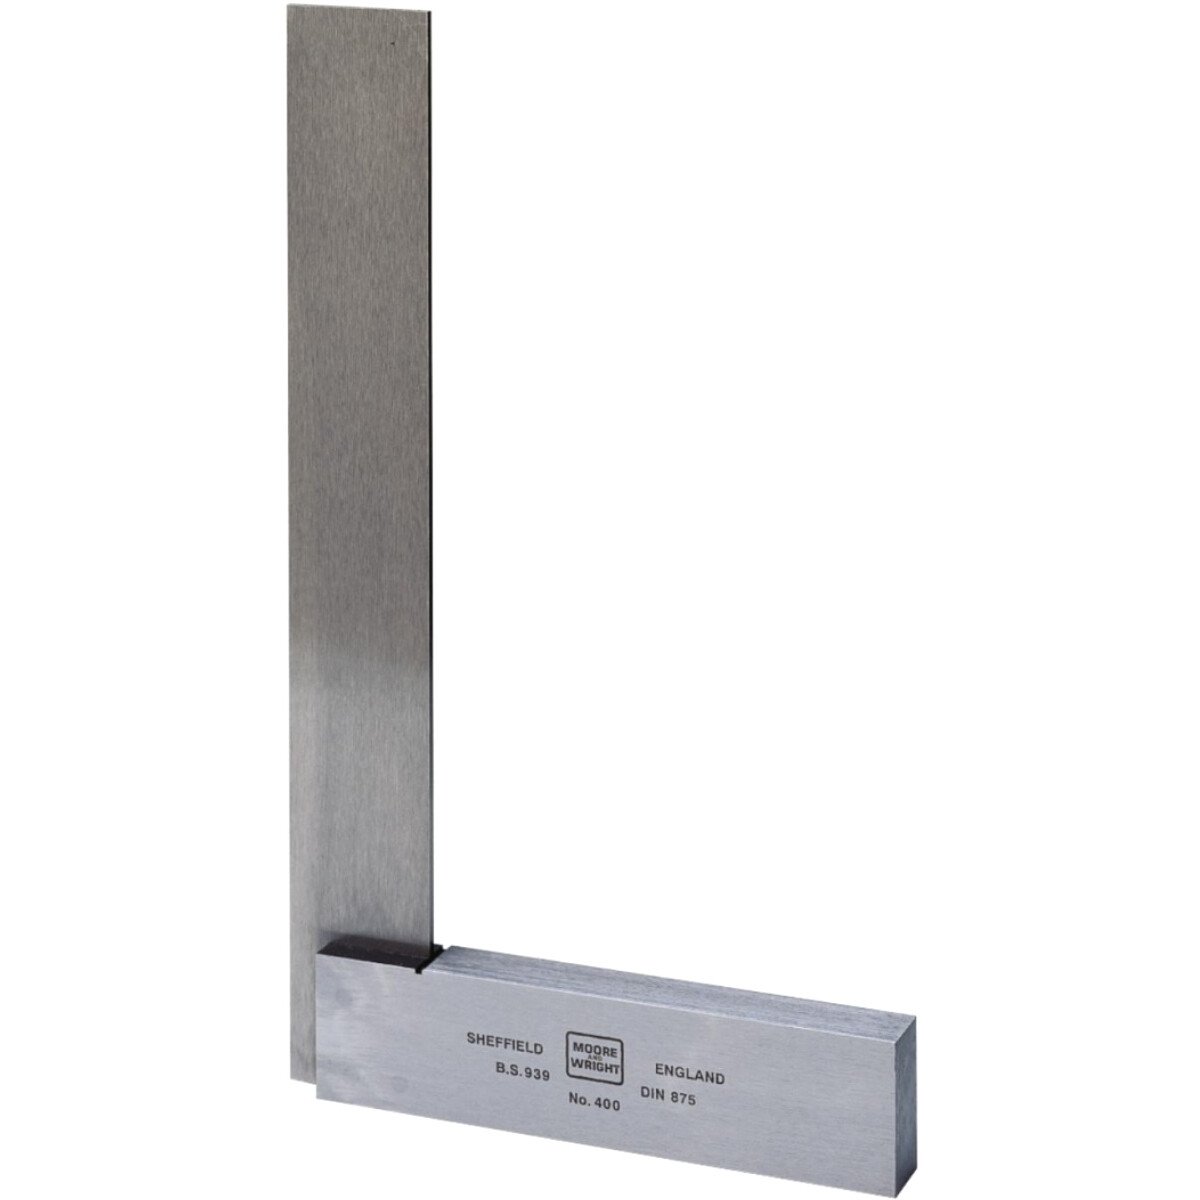 Moore and Wright 4004 100mm (4") 400 Series Engineers Square Grade B